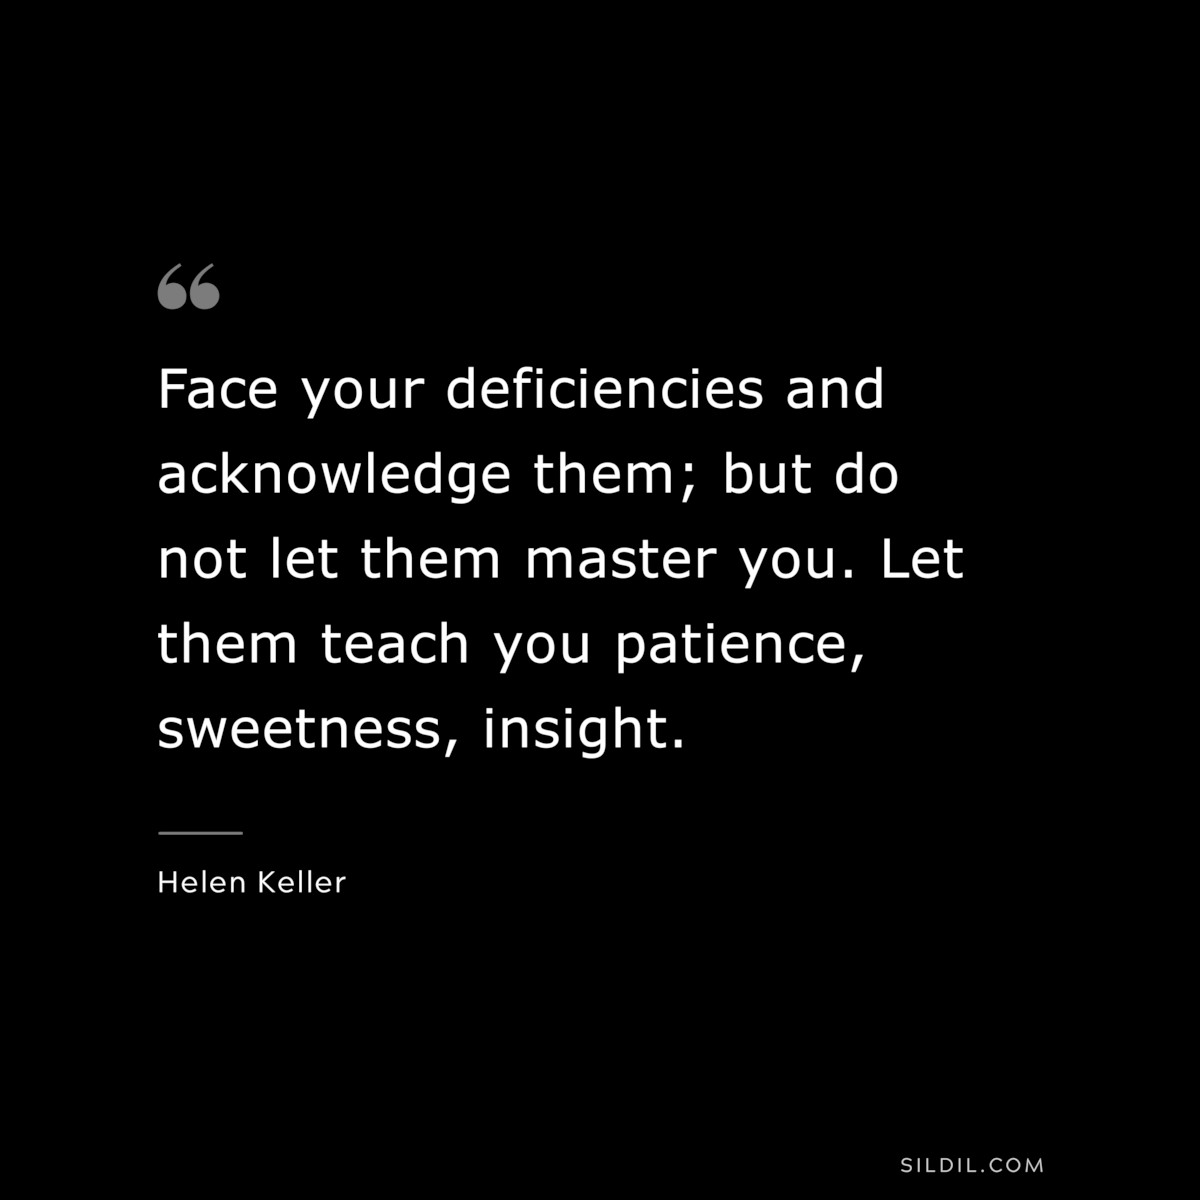 Face your deficiencies and acknowledge them; but do not let them master you. Let them teach you patience, sweetness, insight. ― Helen Keller